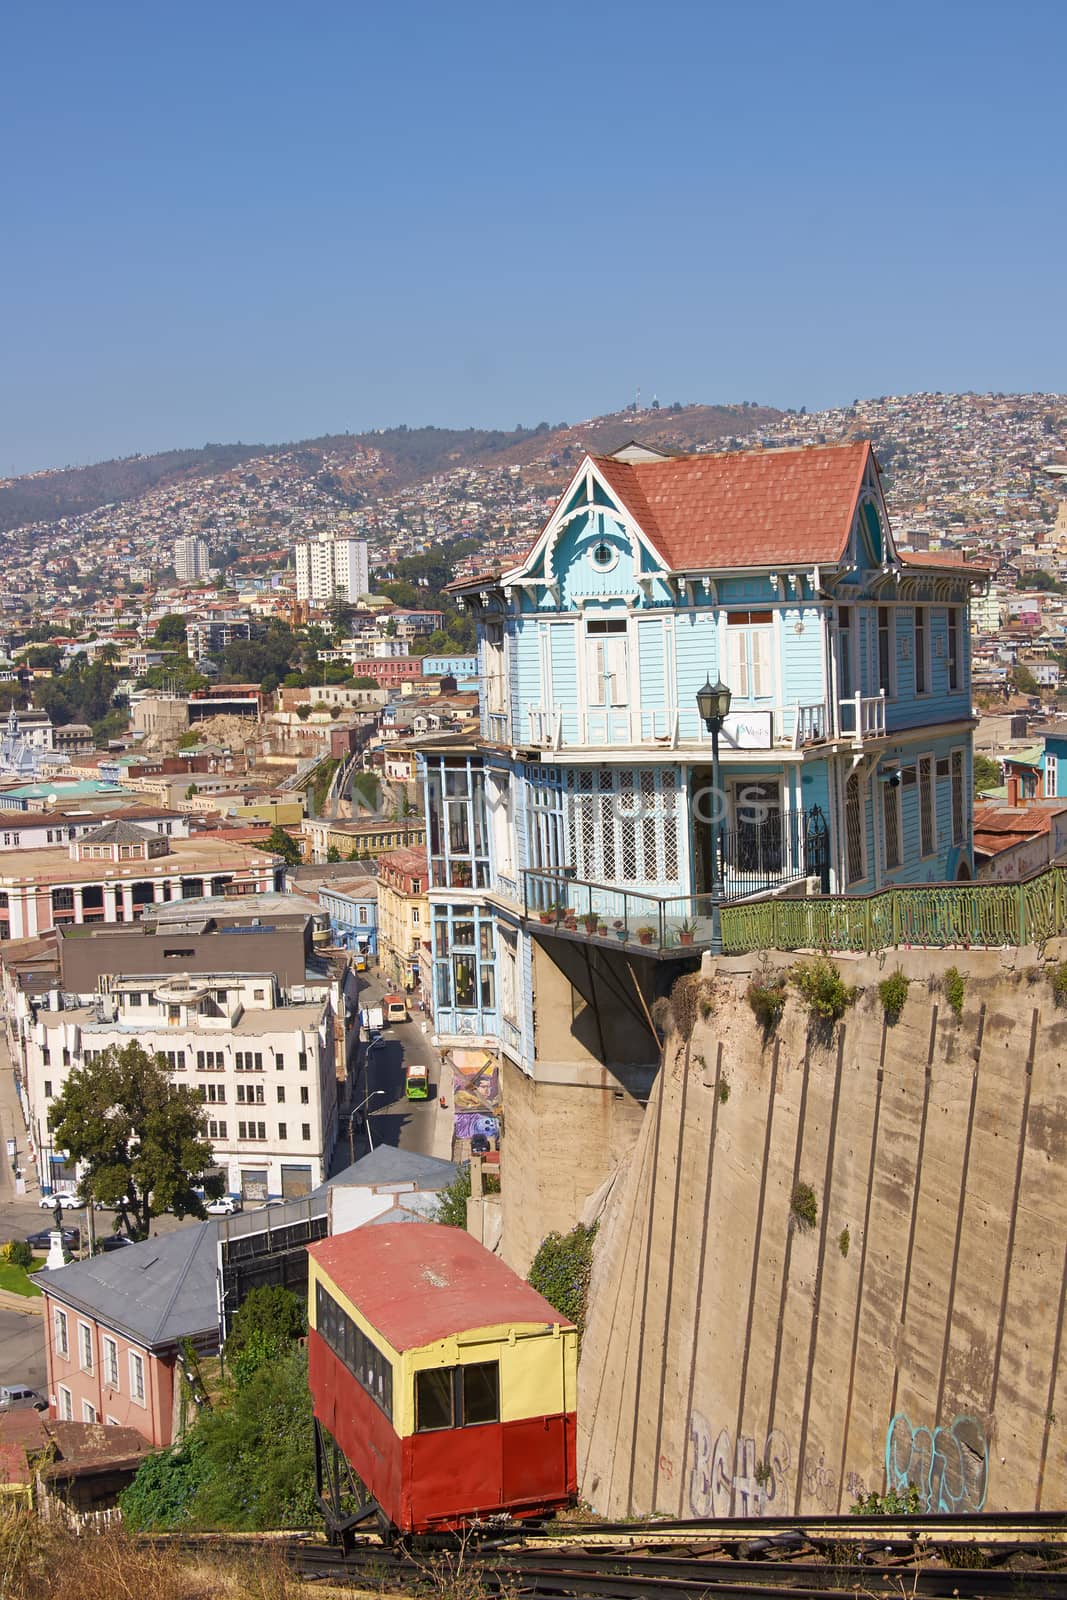 Carriage of the historic Ascensore Arttilleria travelling up a steep hillside in port city of Valparaiso in Chile .